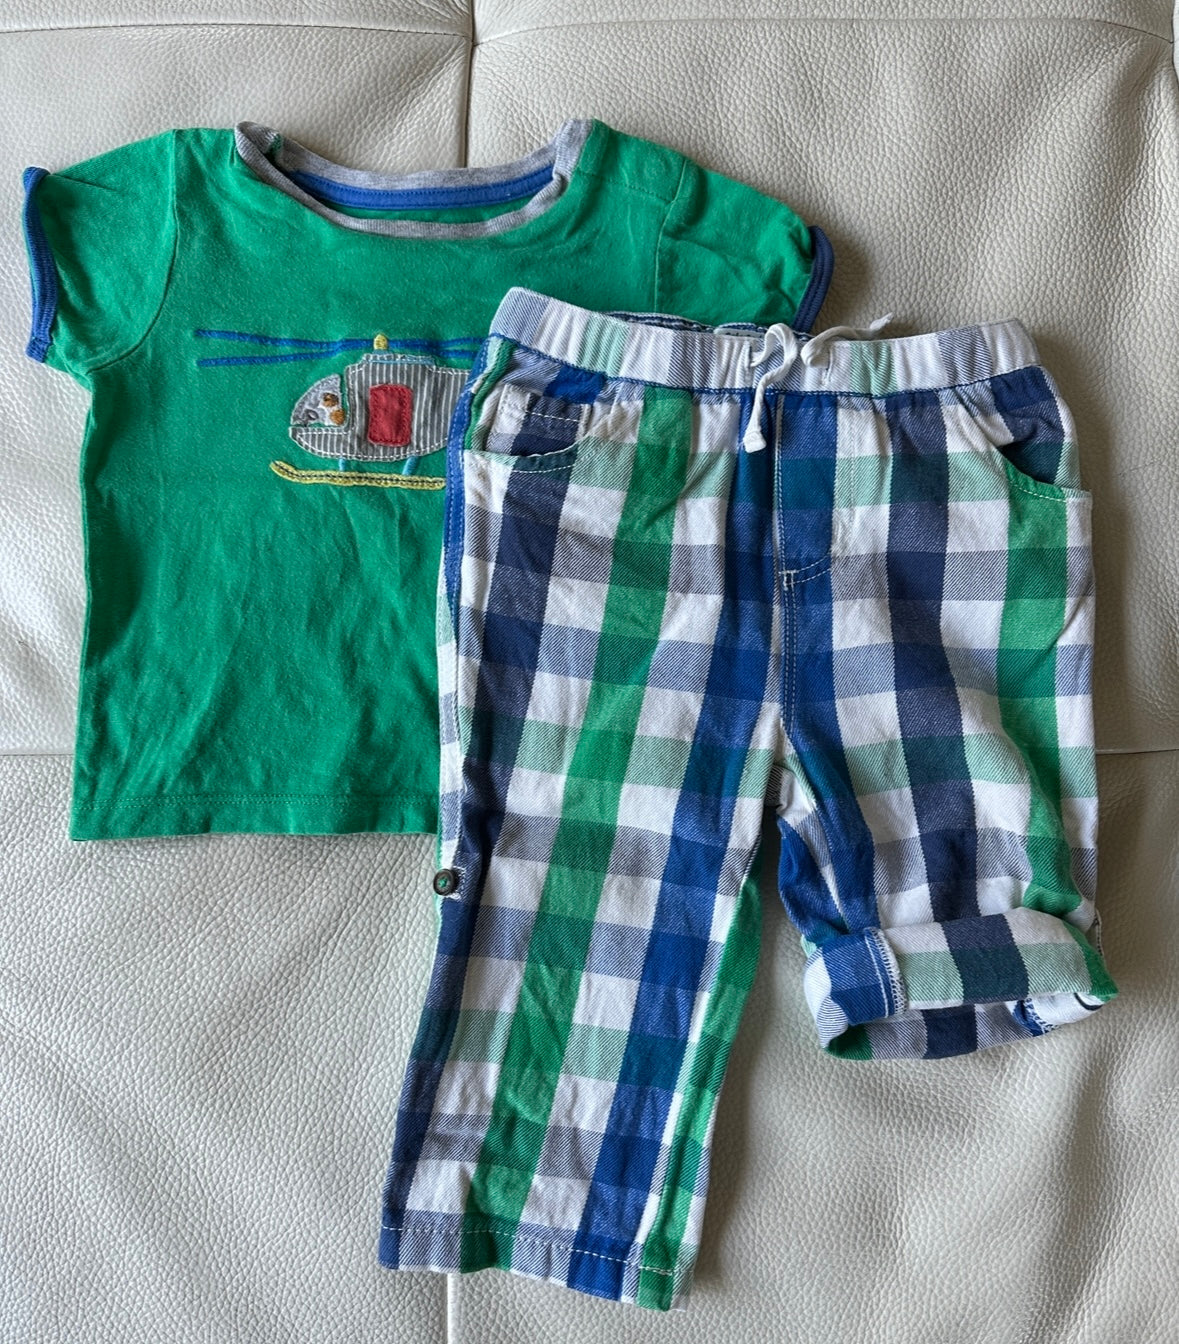 Baby Boden size 12-18 mo outfit